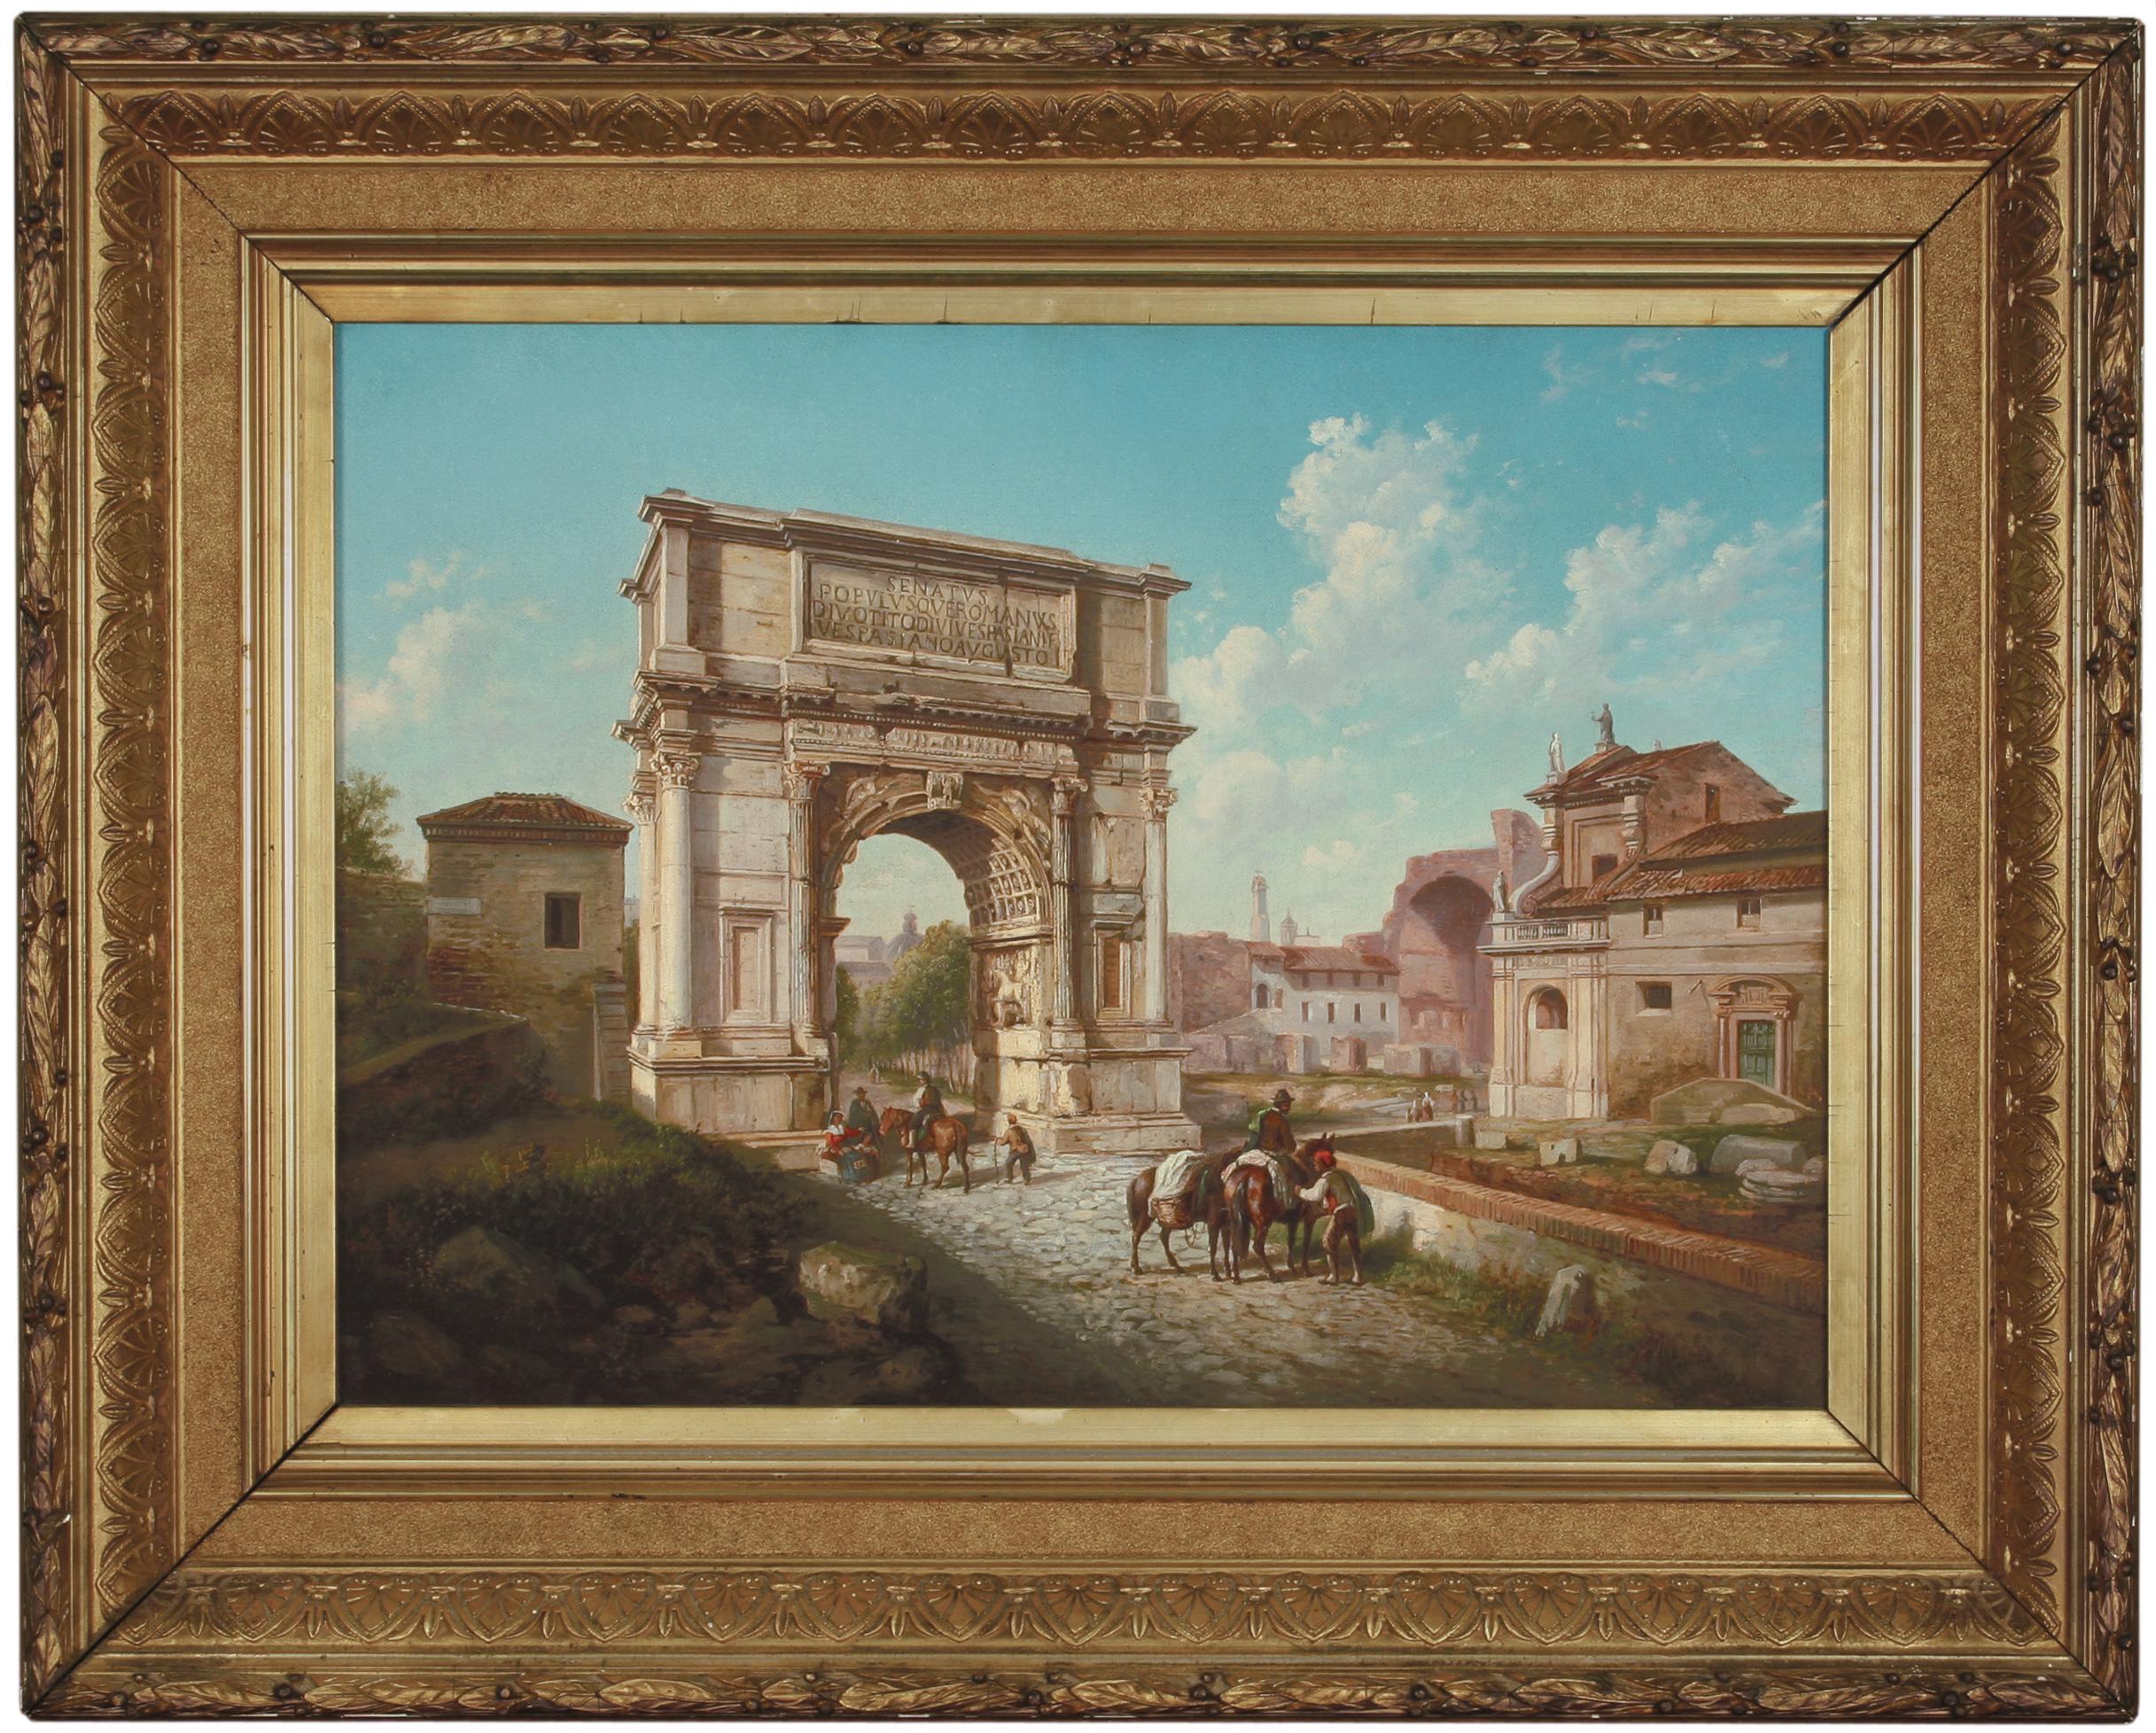 Arch of Titus, Rome - a view of the Arch and its surroundings c. 1835